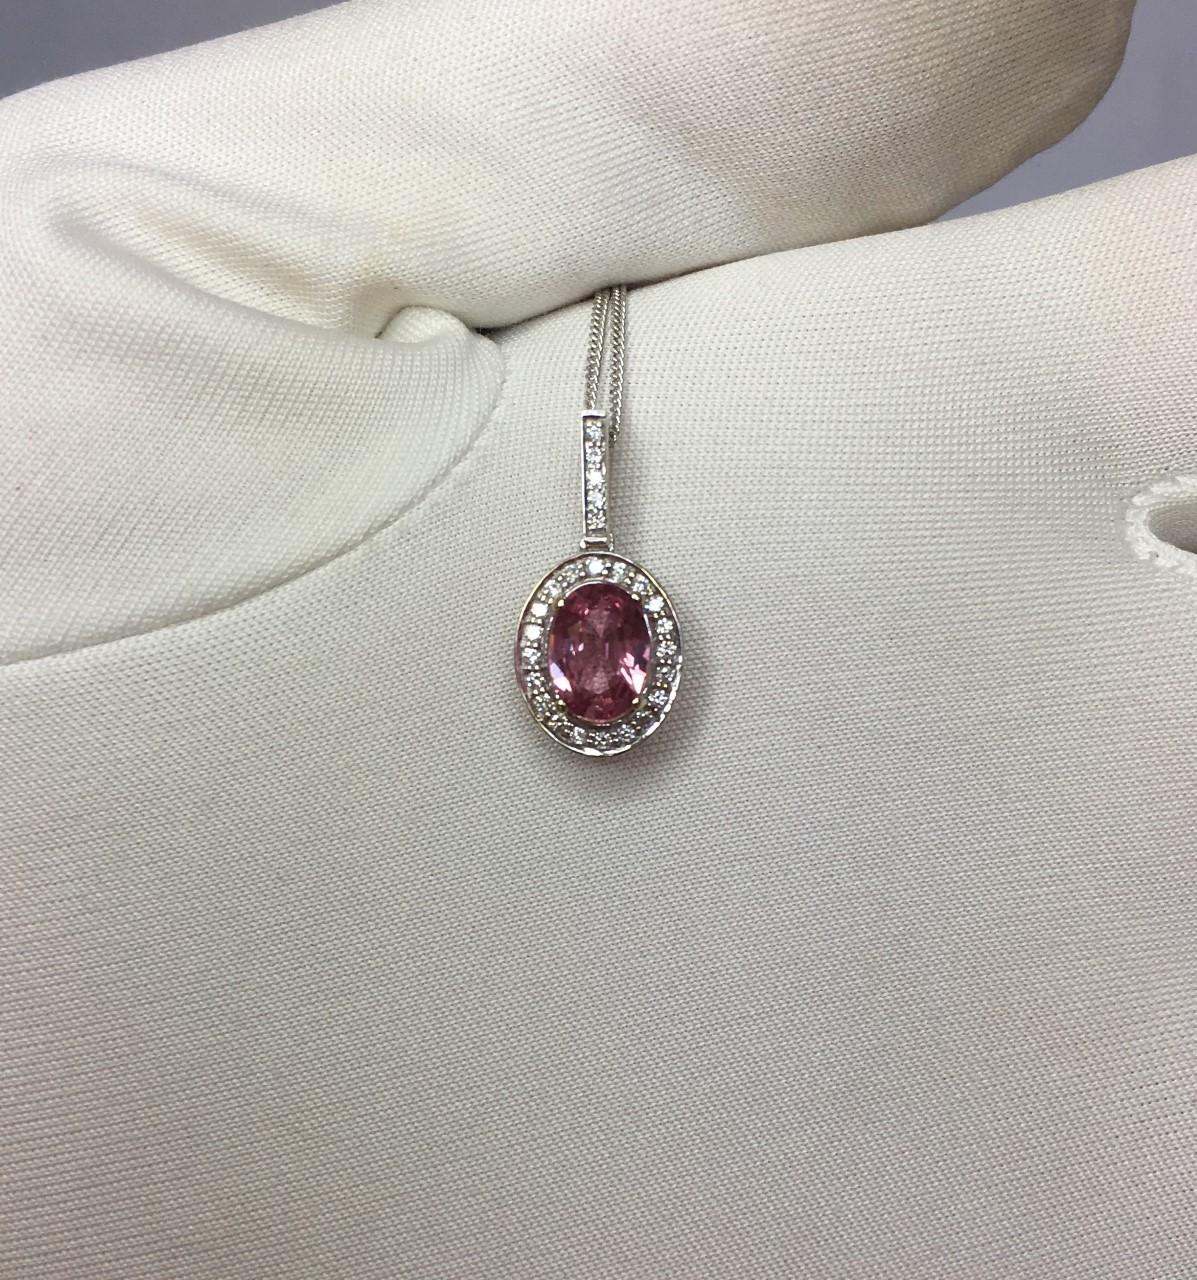 Stunning natural Pink Ceylon sapphire set in a fine 18k white gold diamond cluster pendant. 

0.80 carat centre sapphire with stunning bright pink colour and excellent clarity.
Ceylon in origin it also has an excellent oval cut to show lots of